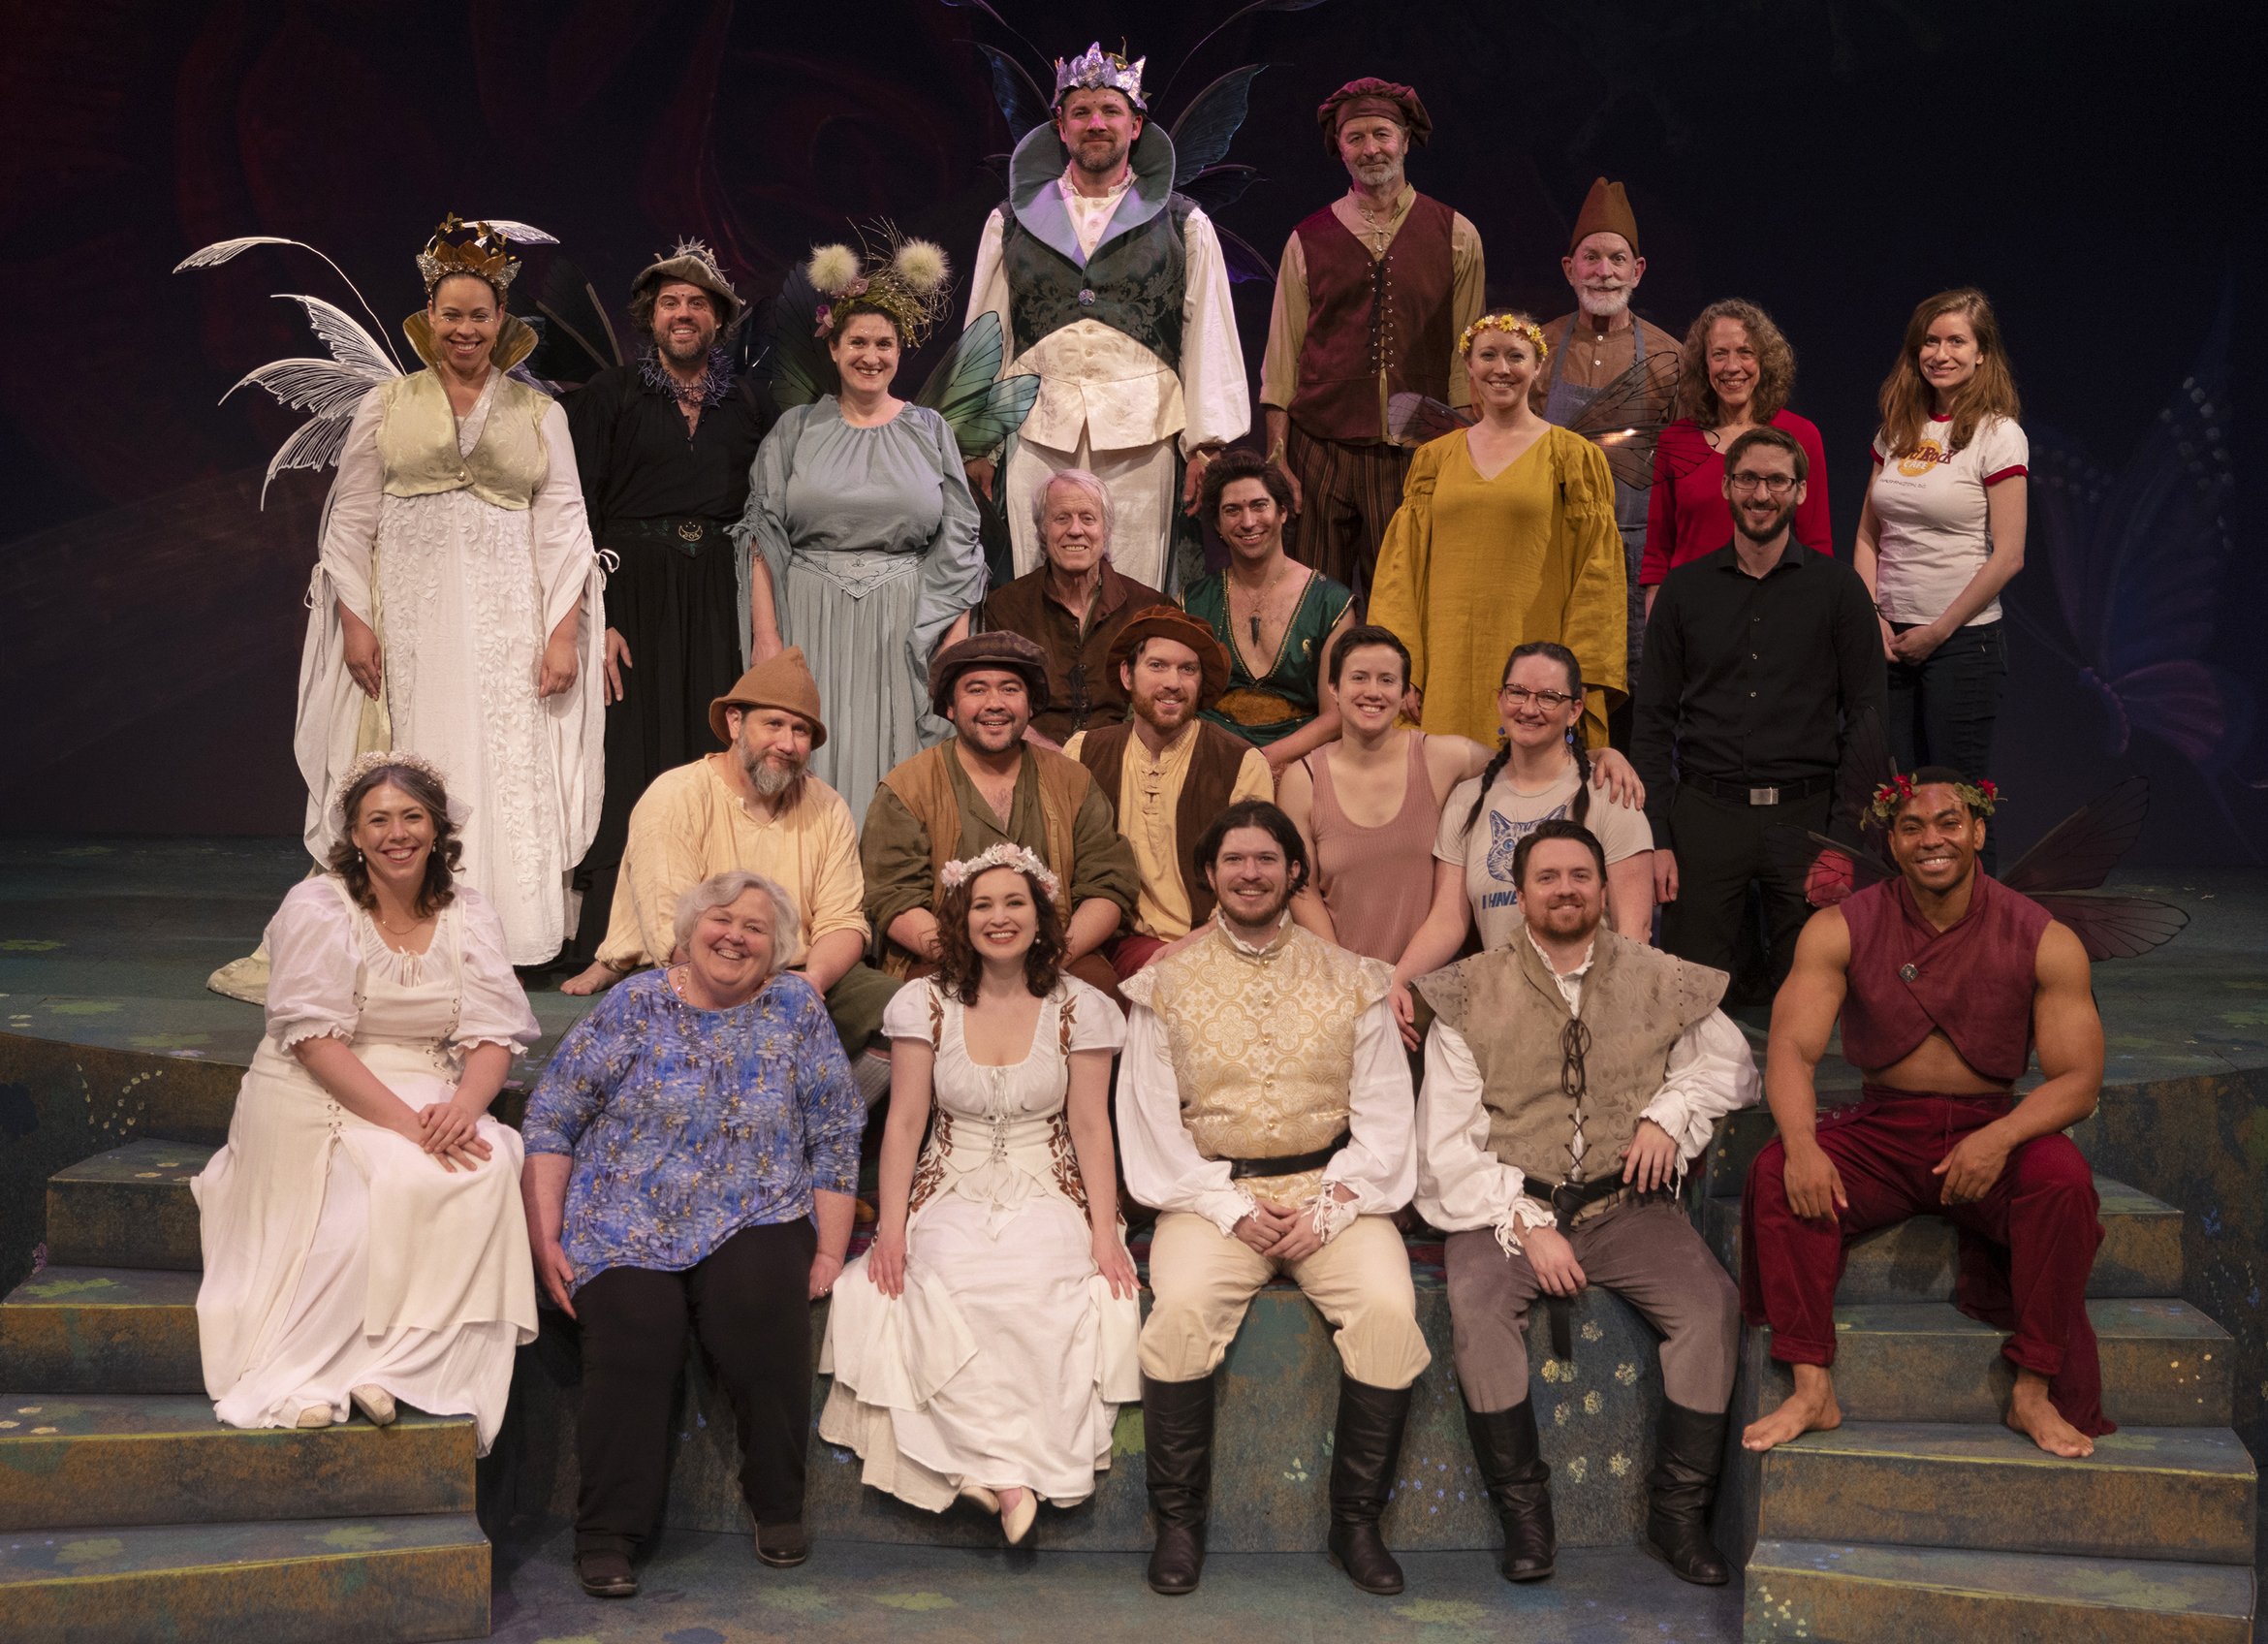 Directors, musicians, cast and crew of "A Midsummer Night’s Dream." Photo by Tim Fuller.